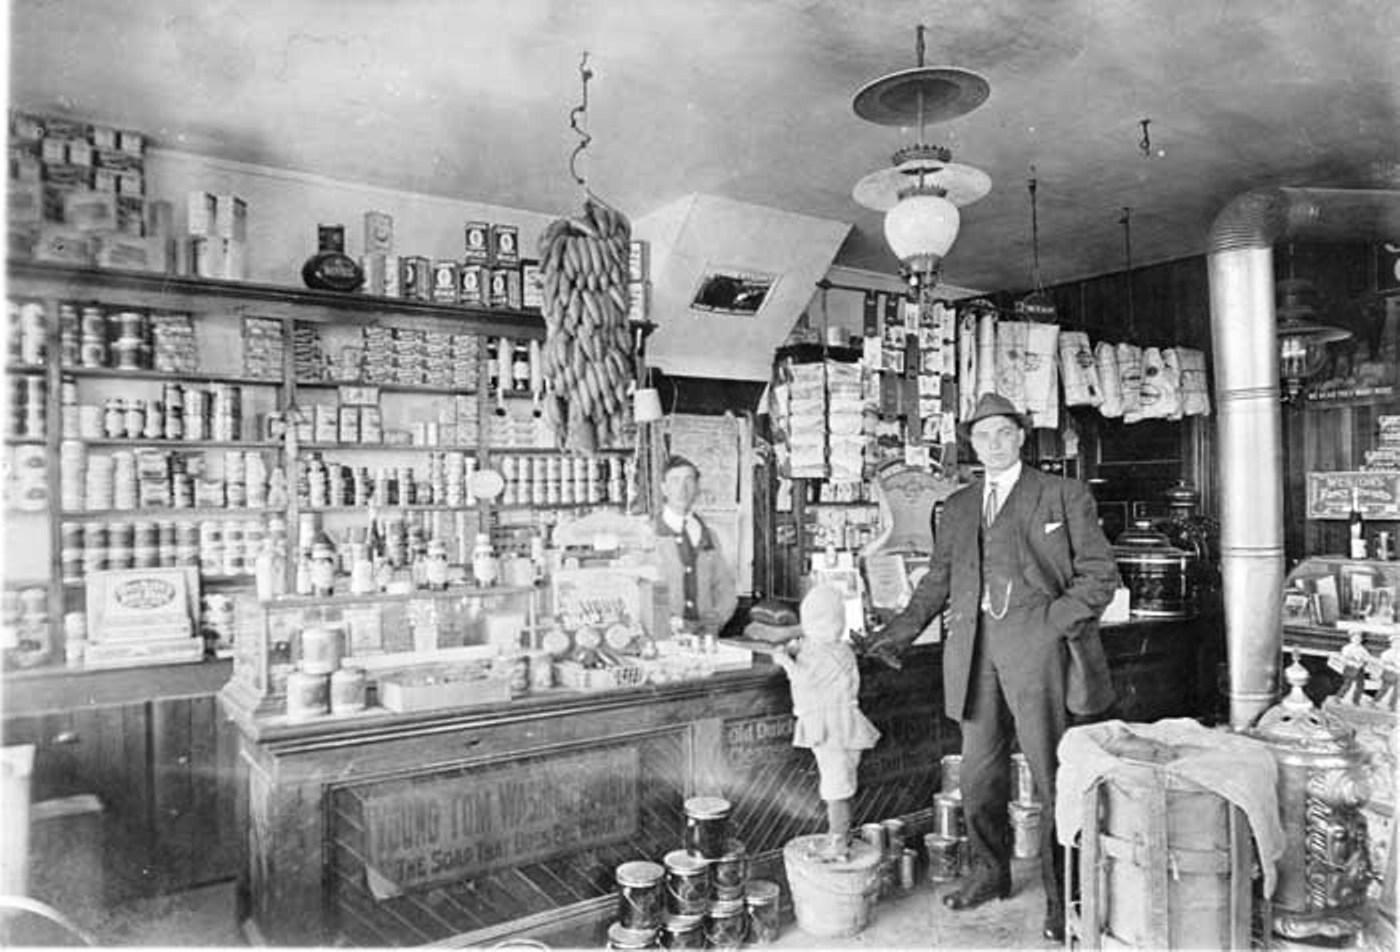 Another inside view of the Linfield grocery store, c. 1920